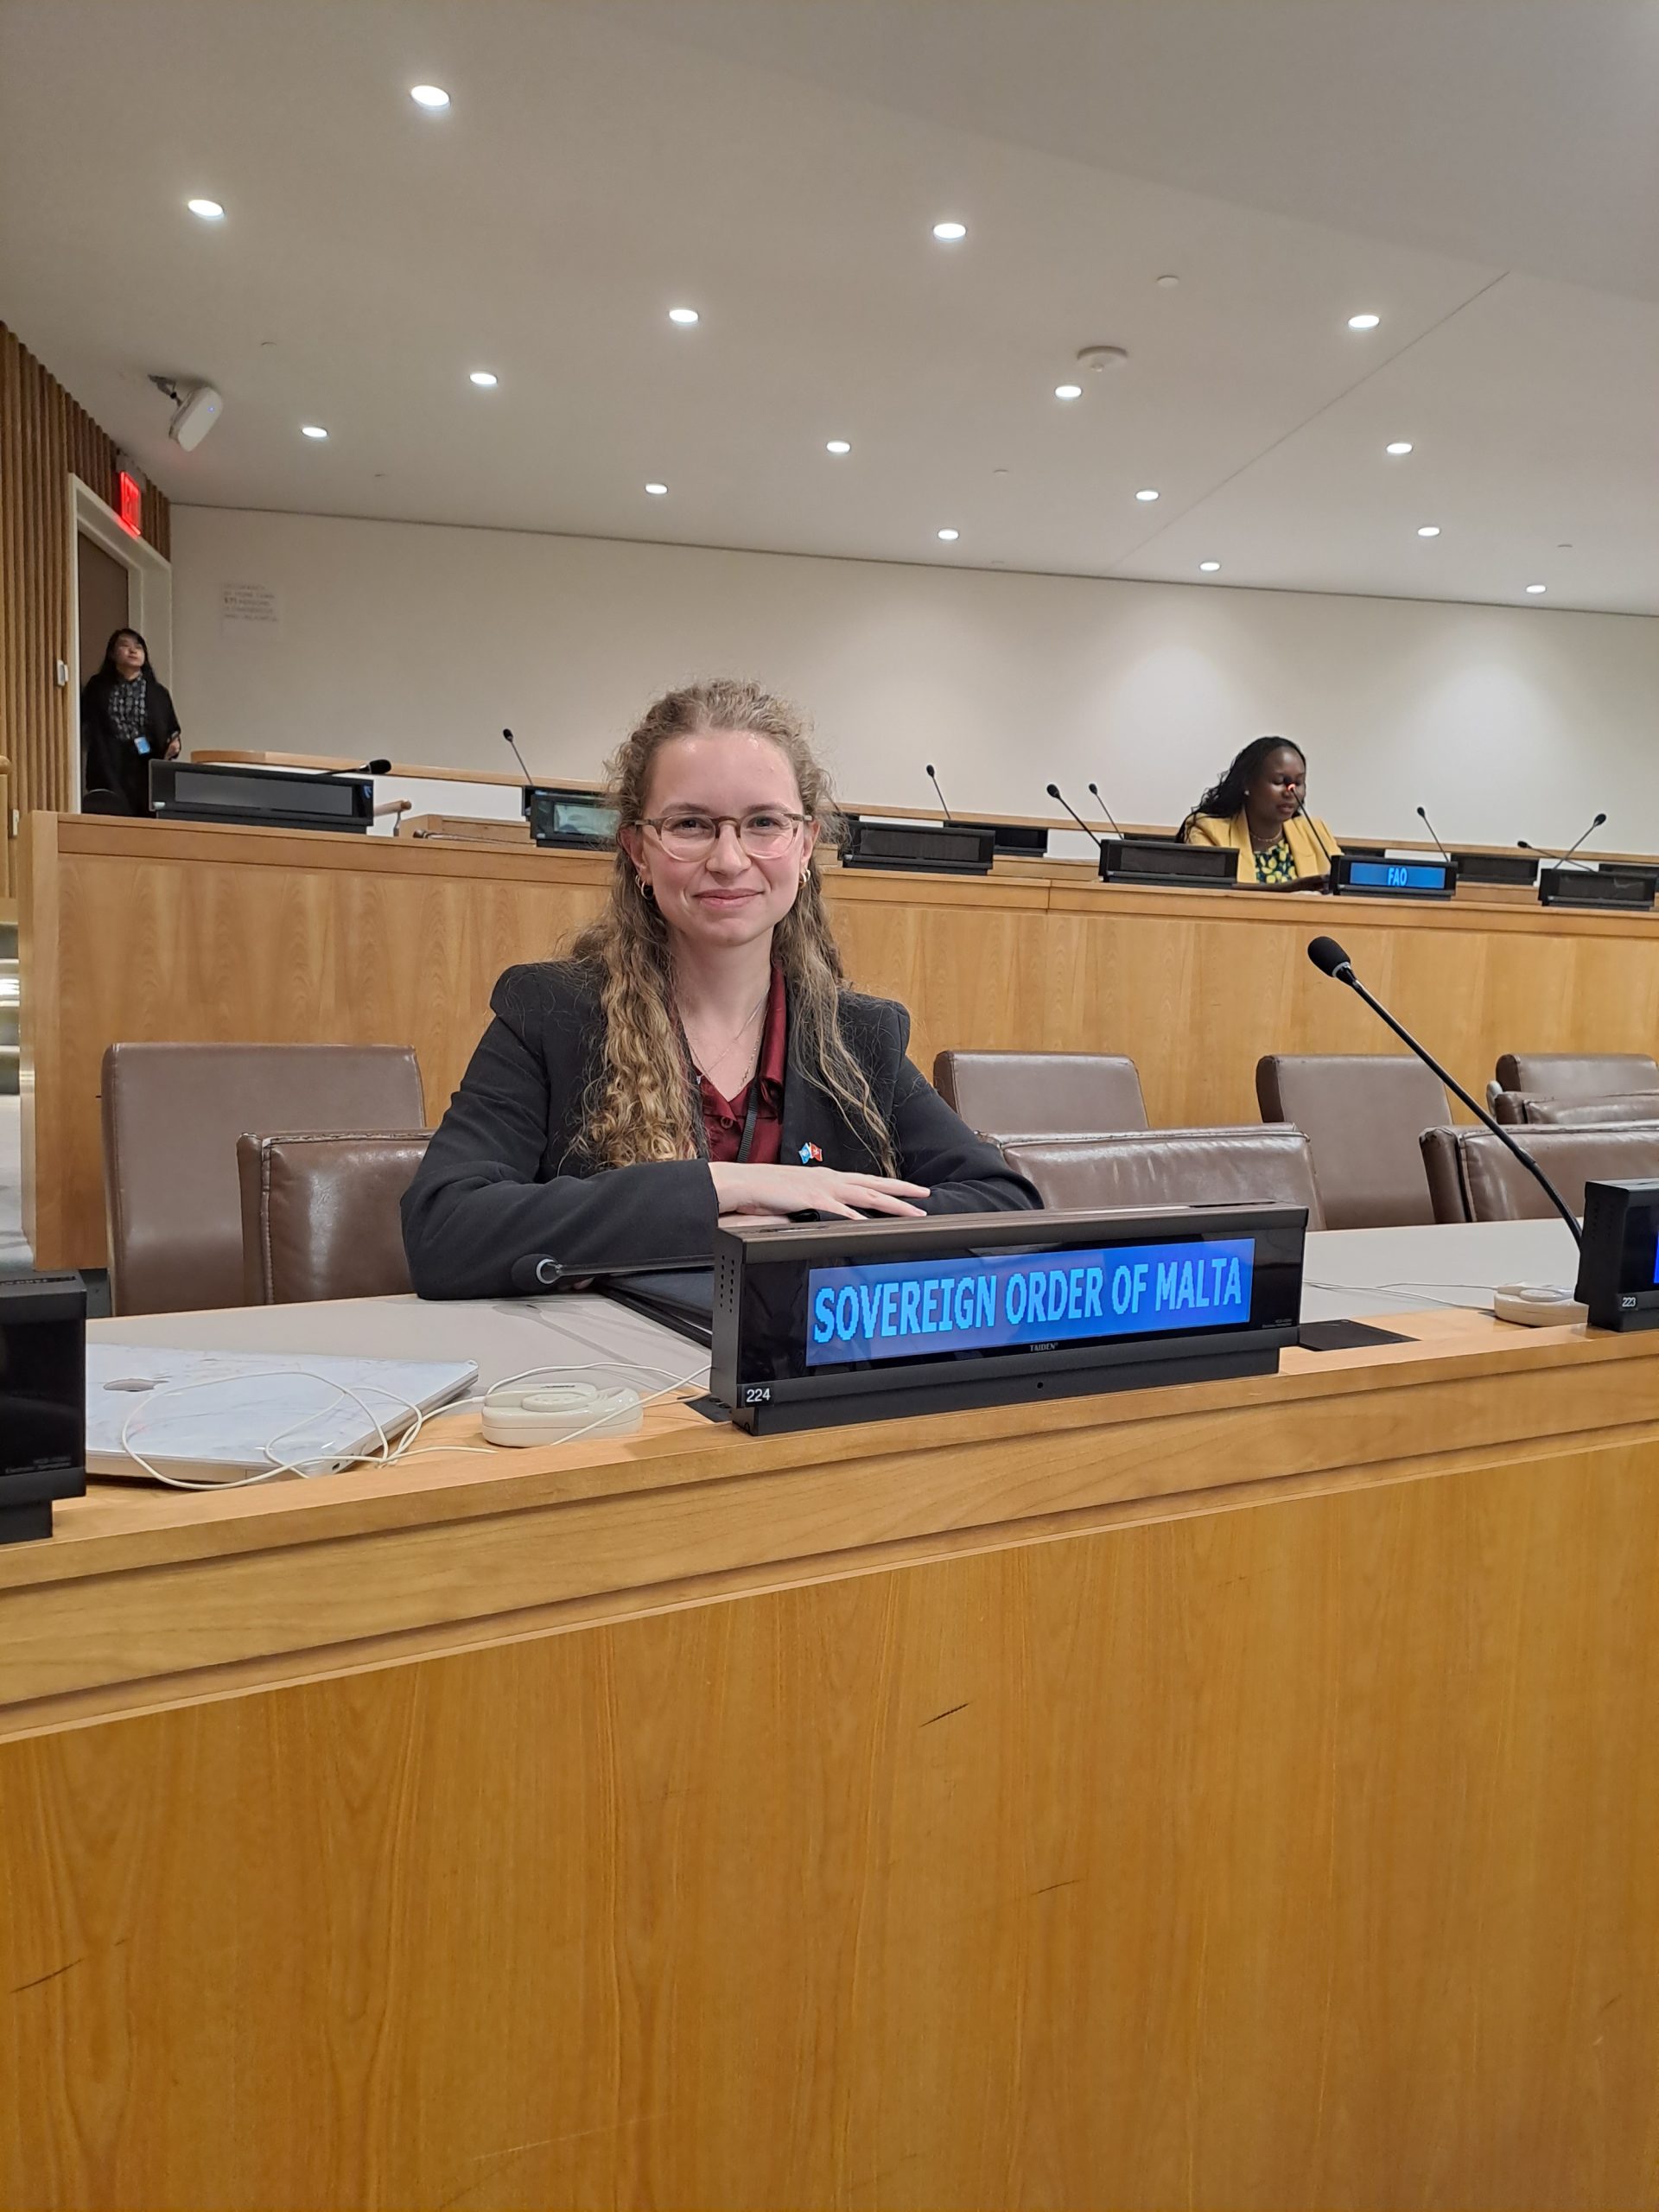 Counsellor James E. Buckley and Ms. Costanza Lucii delivered a statement on Advancement of Women at the Third Committee.